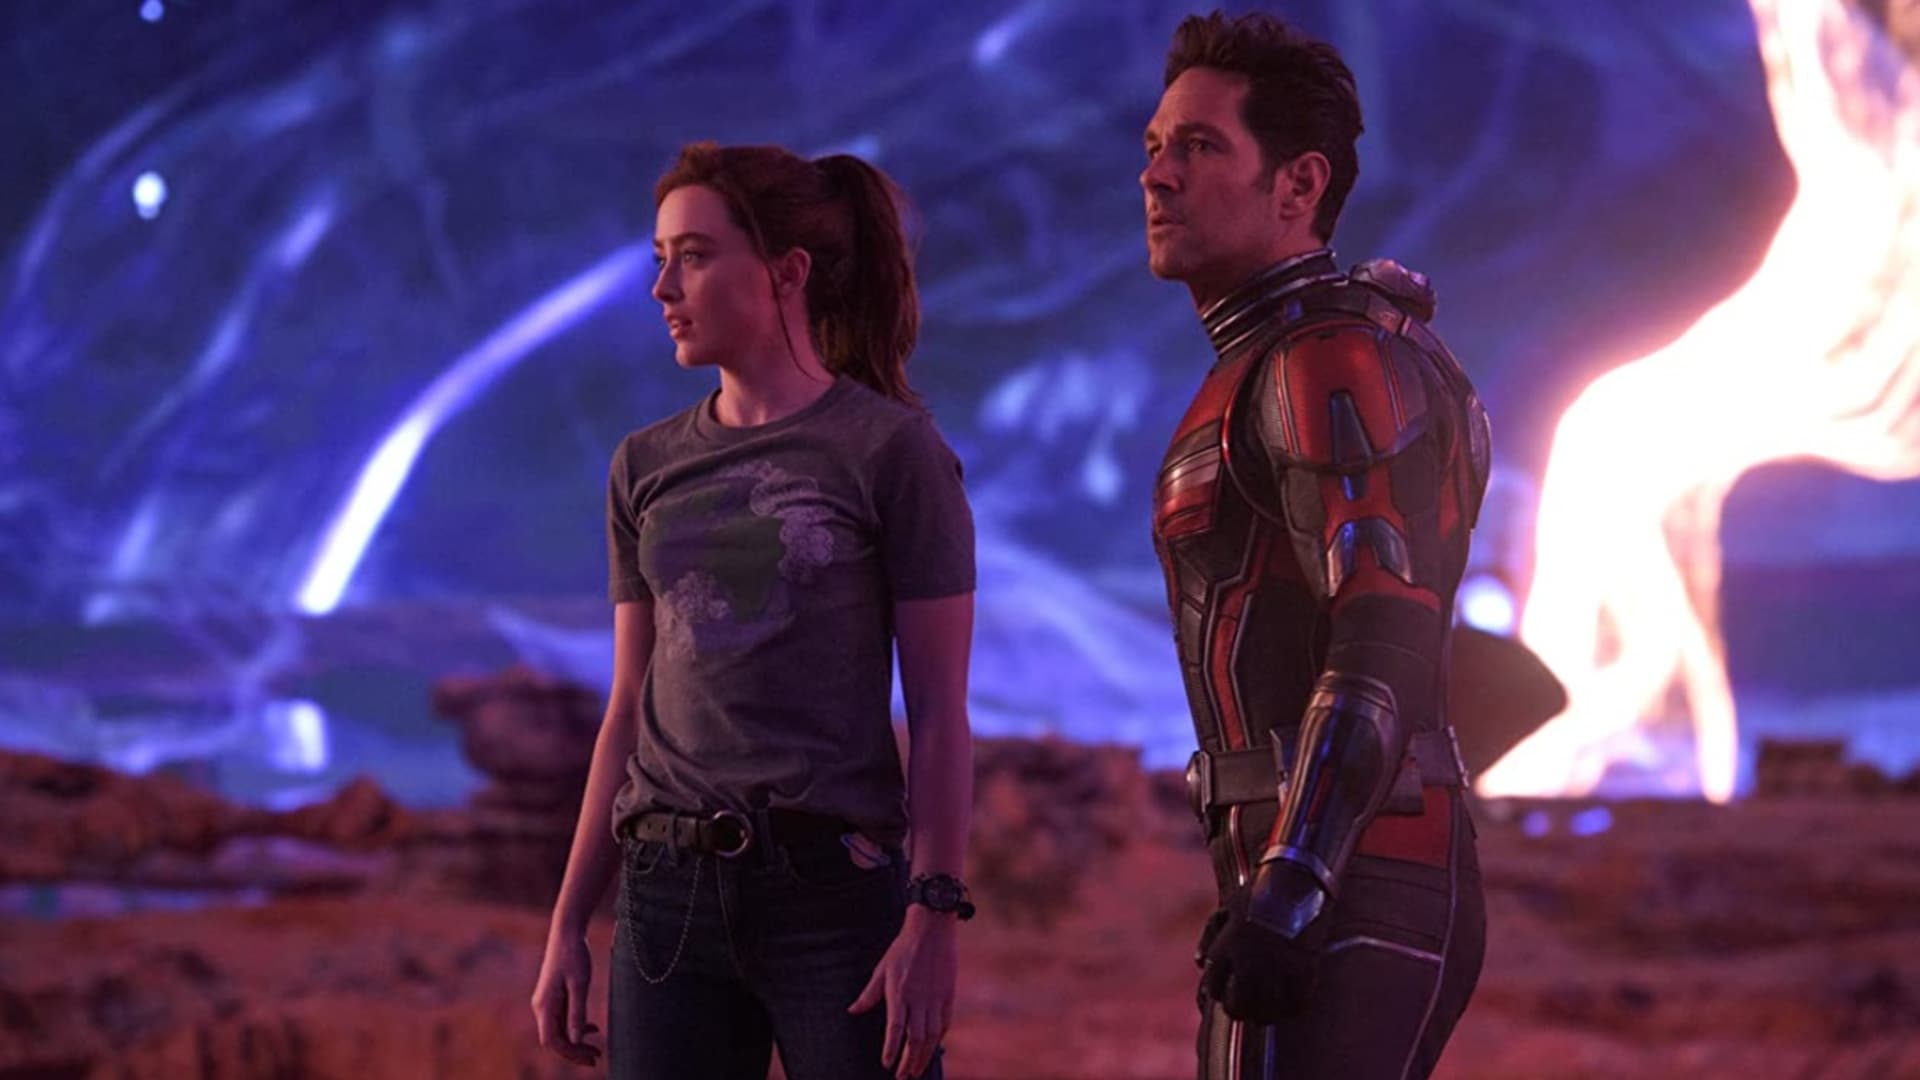 At the time of publishing, Ant-Man and The Wasp: Quantumania has a 54% Rotten  Tomatoes critics rating based on 138 reviews. Only Eternals…